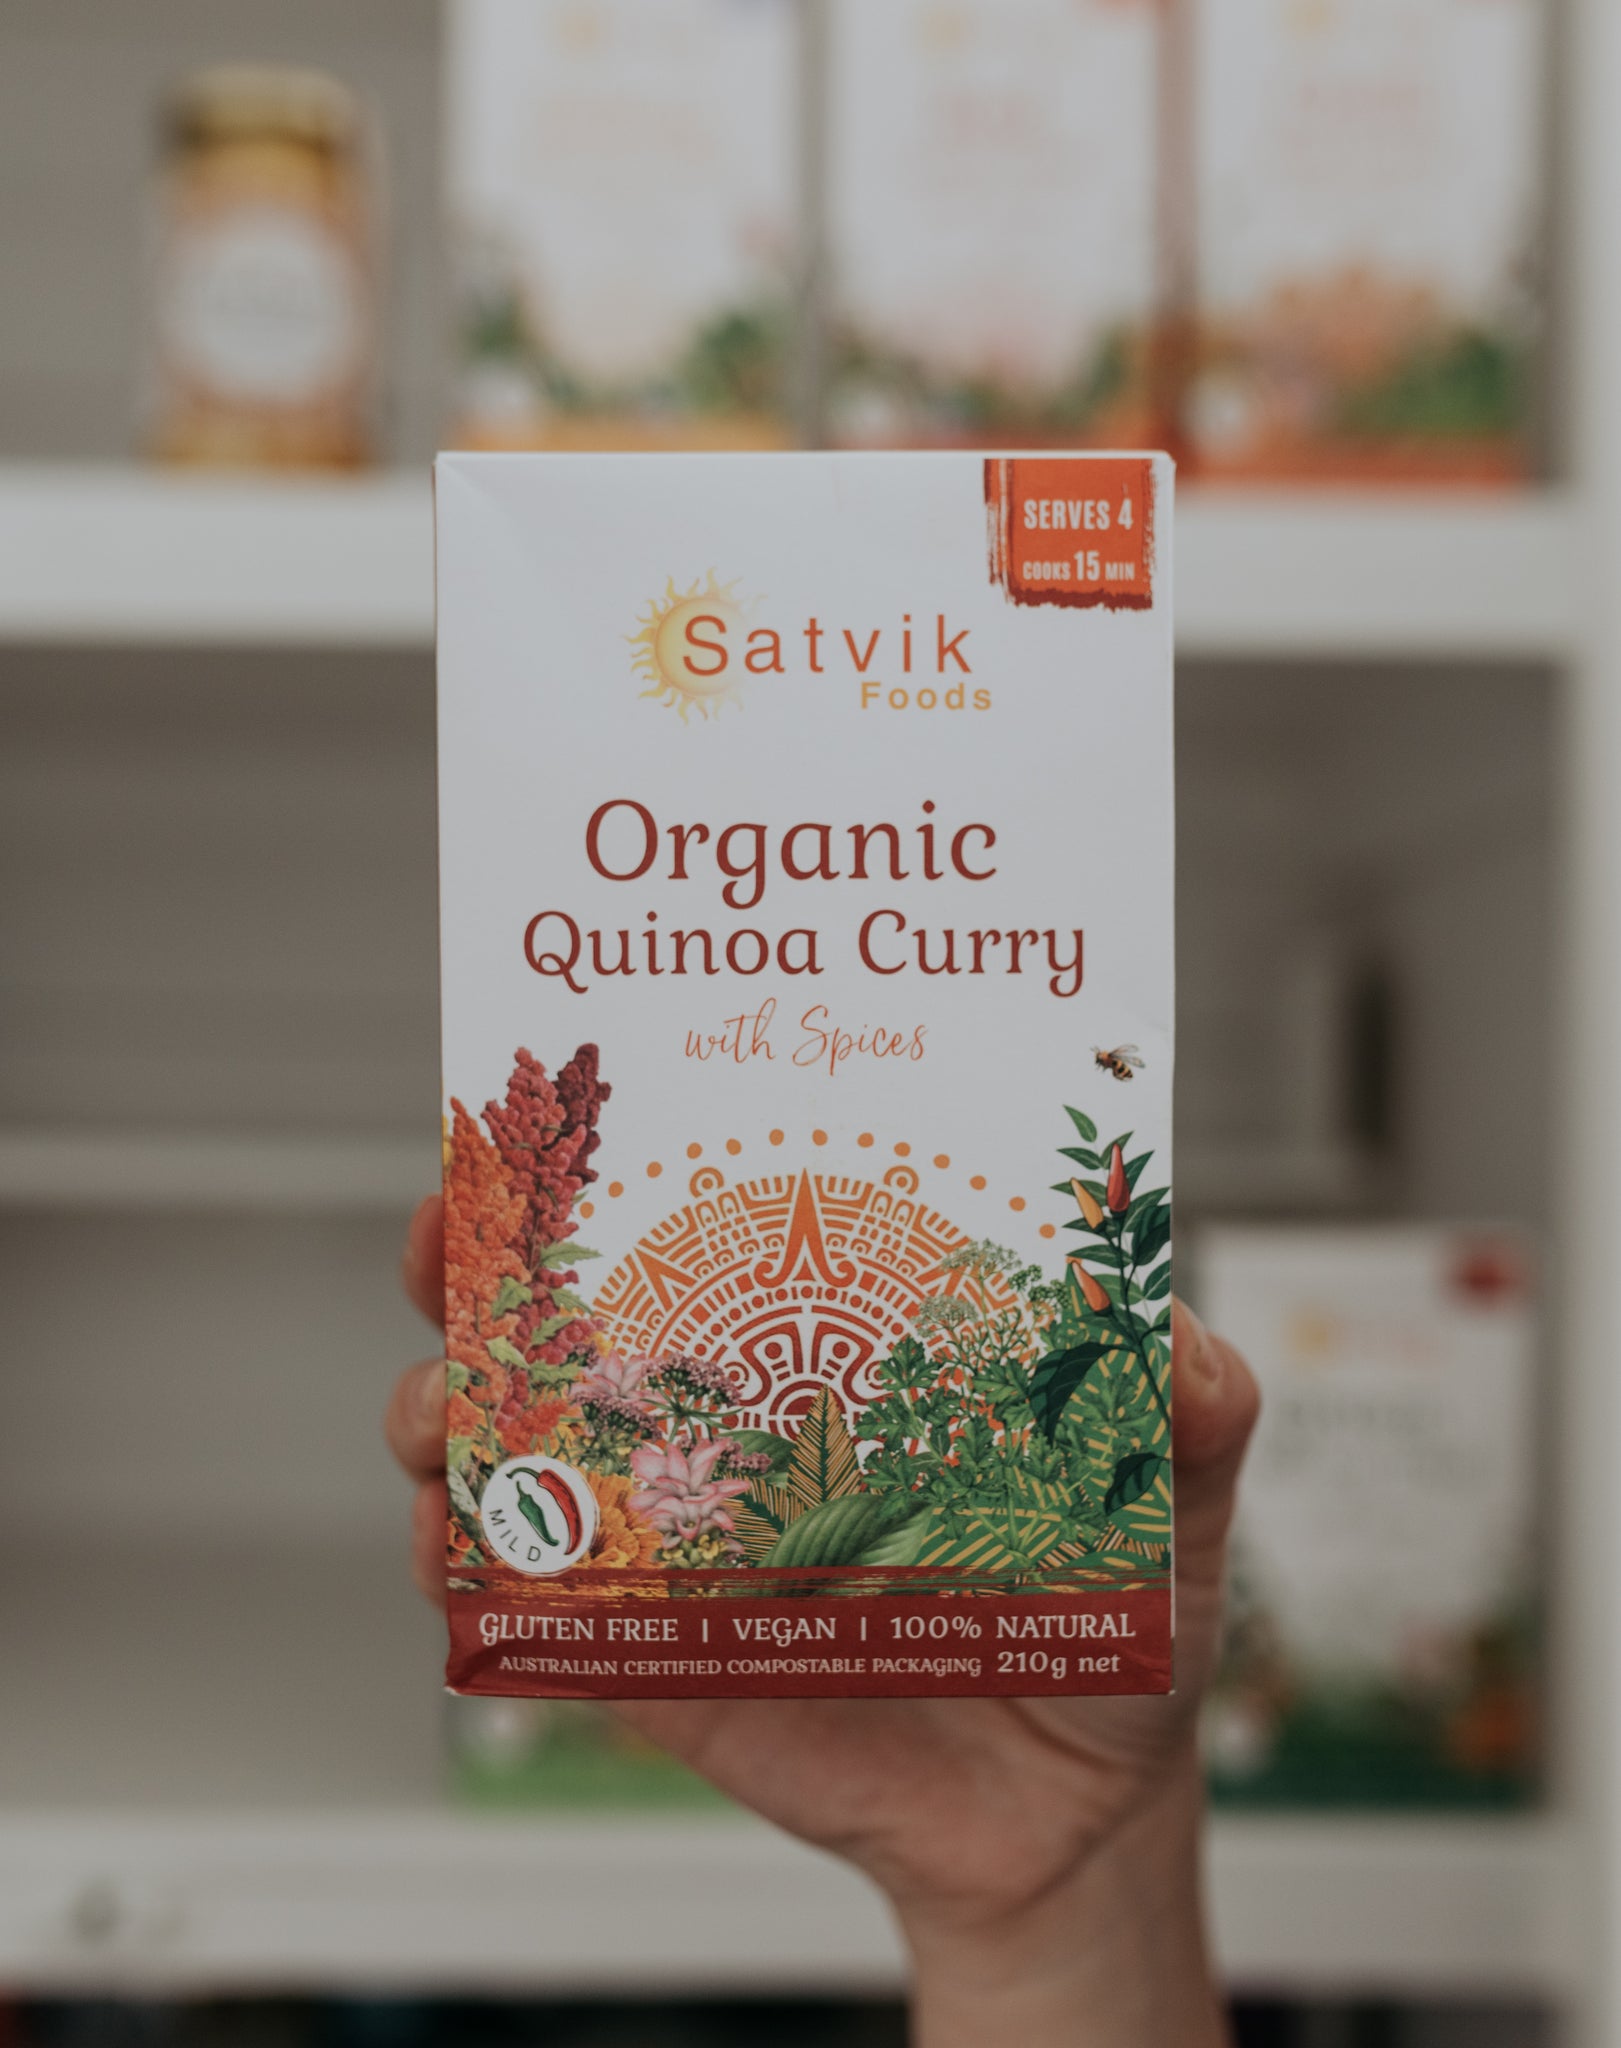 Satvik Foods Quinoa Curry Quinoa is a delicious and nutritious meal option that can be easily prepared at home. The product is available for purchase online and is made with organic quinoa and a blend of unique Ayurvedic spices. The product page includes information about the weight, ingredients, and cooking instructions.